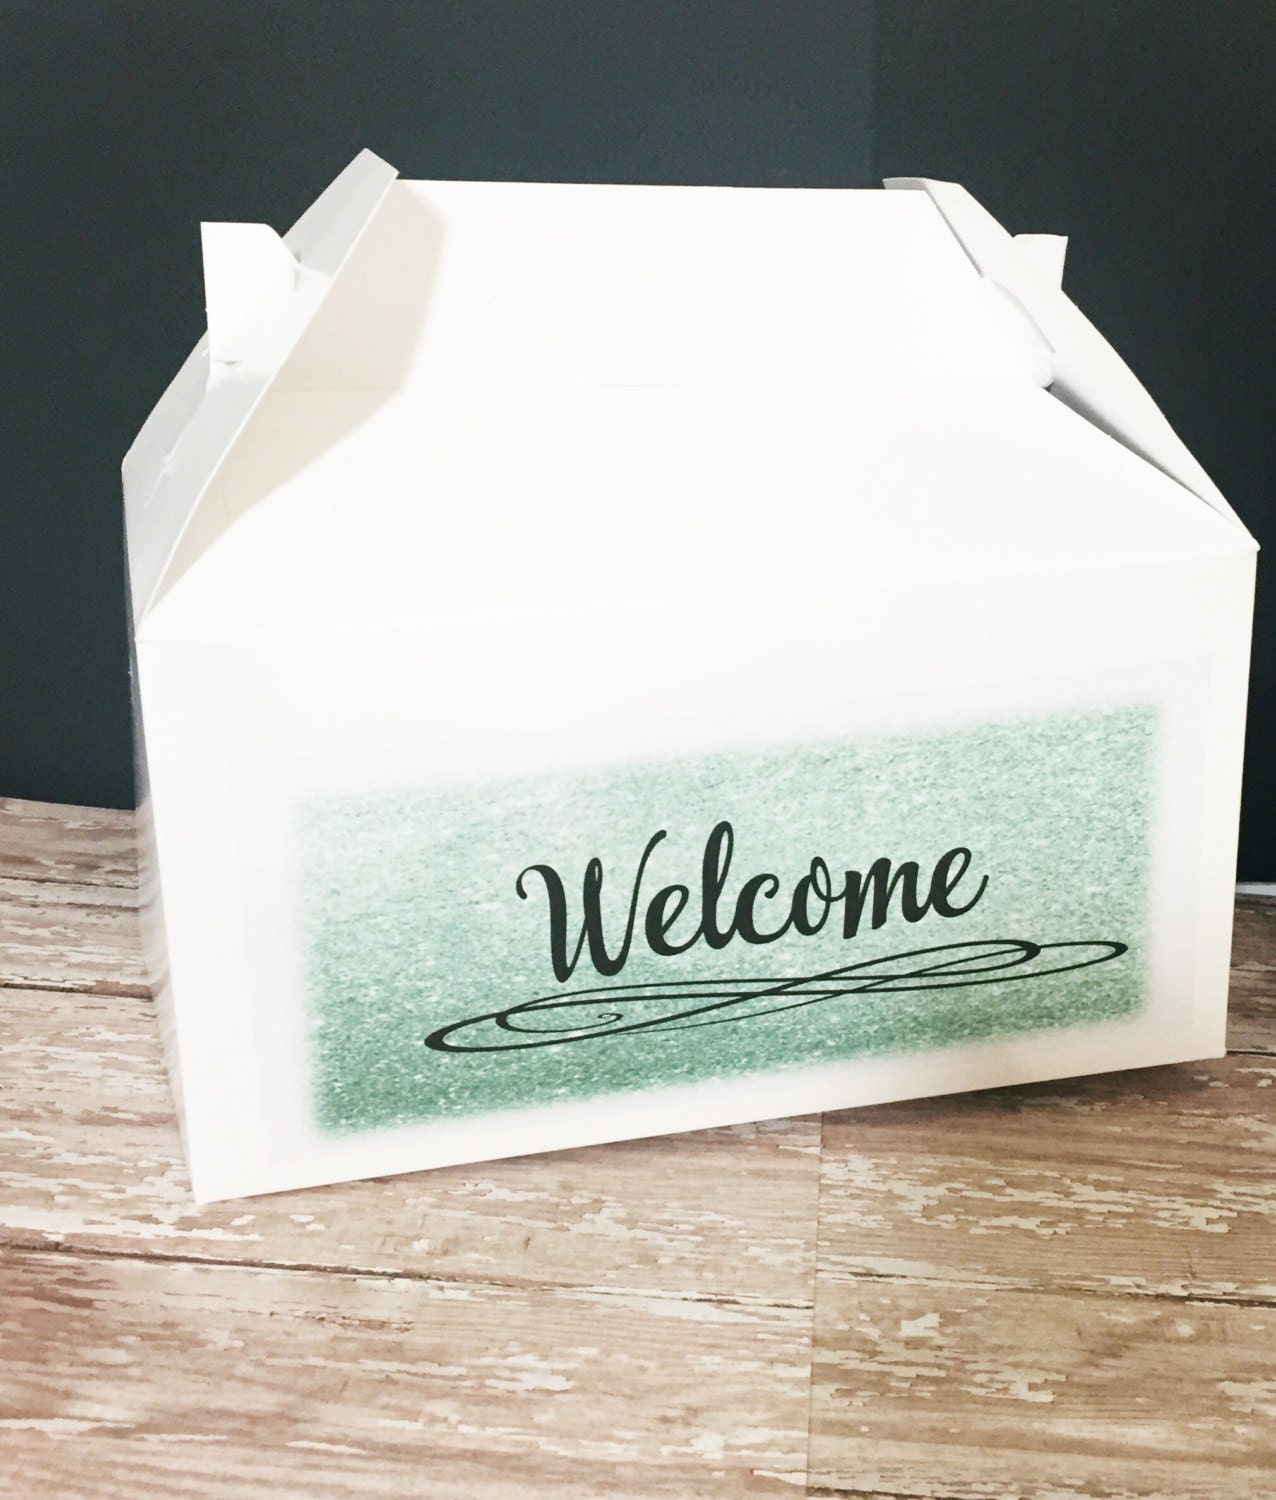 10 Personalized Welcome Boxes | Gable Boxes | Out of Town Boxes | Welcome Gable Boxes | Personalized Welcome Boxes | Custom Welcome Box